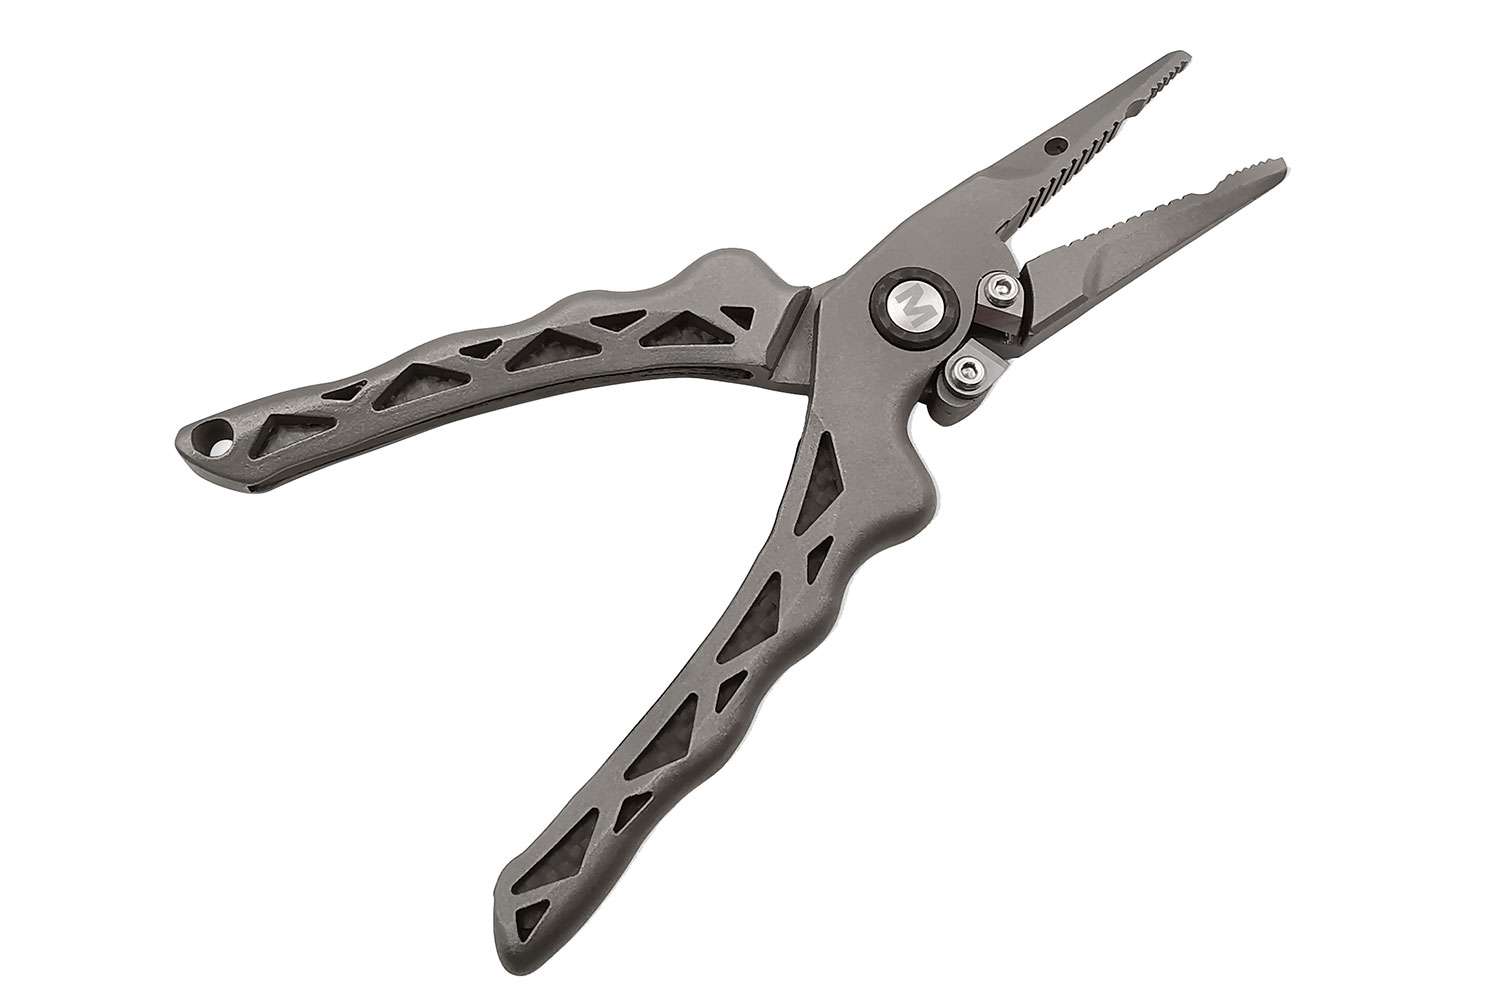  <B>Mustad Mustad 6 1/2-inch Titanium Plier</B></p>
<p>Mustad unveils its Black Line of tools with top-of-the-line titanium pliers built for rough use. Designed with toughness and comfort in mind, these pliers are built with high-quality titanium in an ergonomic design. Carbon inserts within the handle support the heavy-duty construction for an even stronger bite. On the side, youâll find a scissor-style clipper designed to cut lines without switching tools. When in waiting, these pliers rest in a leather sheath easily attached to a belt.
<BR>
<B>MSRP $129.99</B>